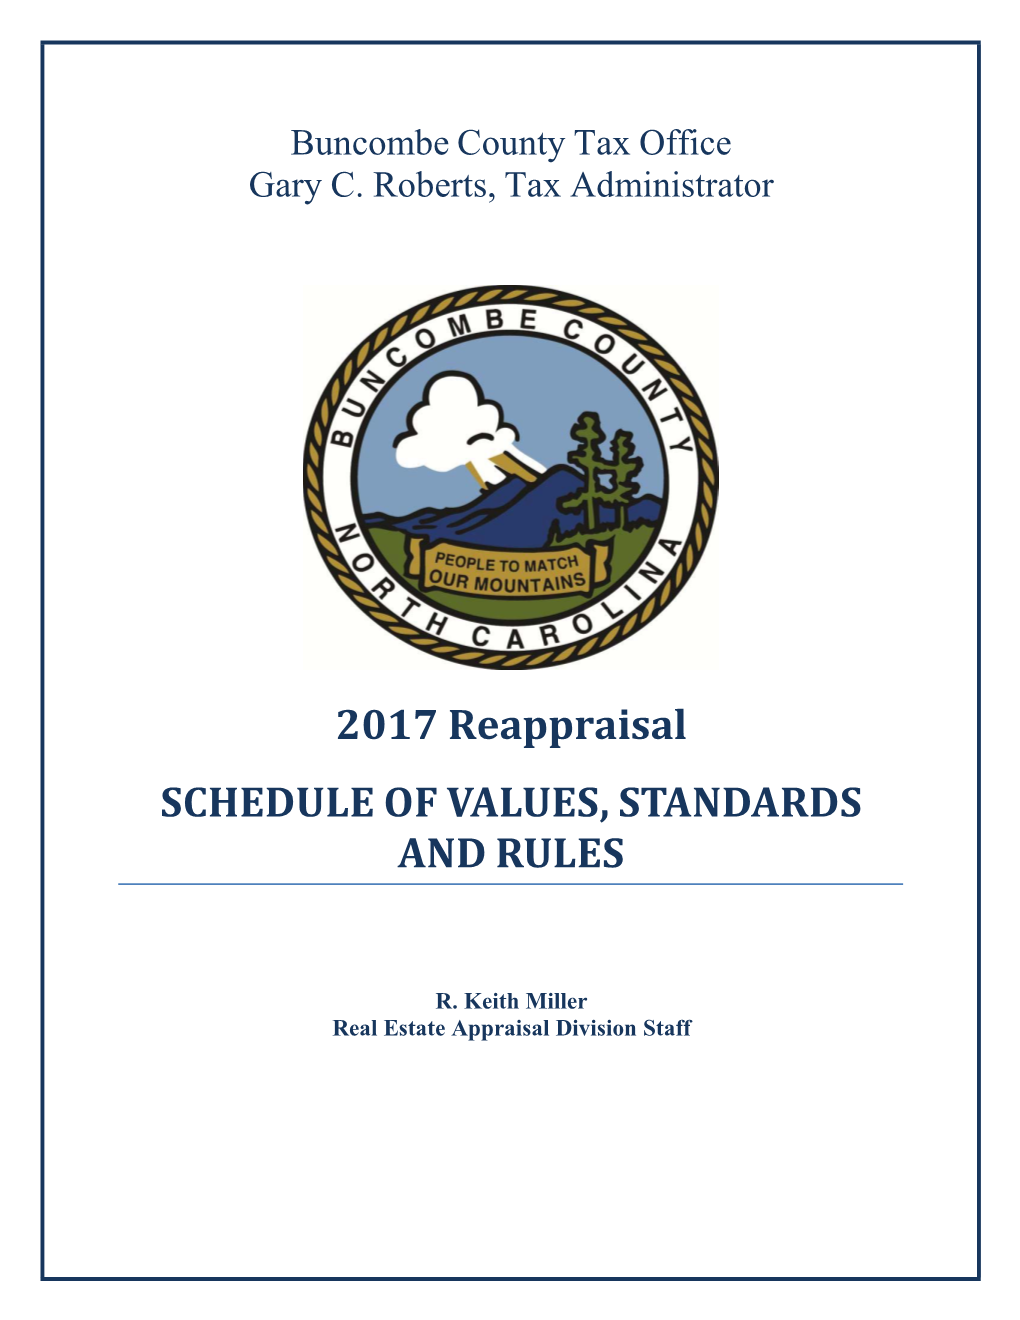 2017 Reappraisal SCHEDULE of VALUES, STANDARDS and RULES